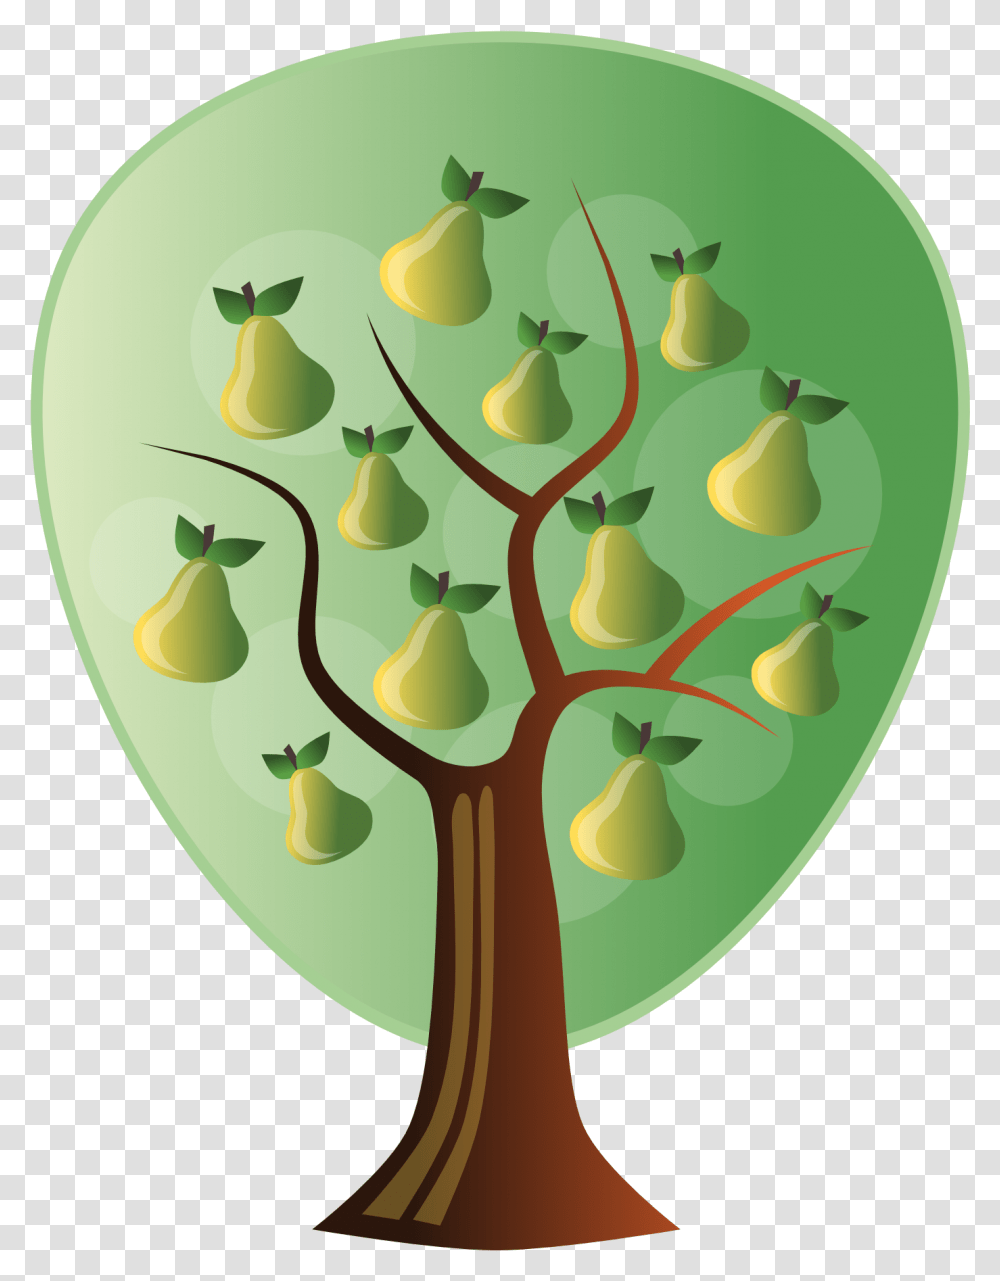 Download Pear Tree Clipart Translucent Pear Tree Clipart Pear Tree Clipart, Plant, Fruit, Food, Cutlery Transparent Png